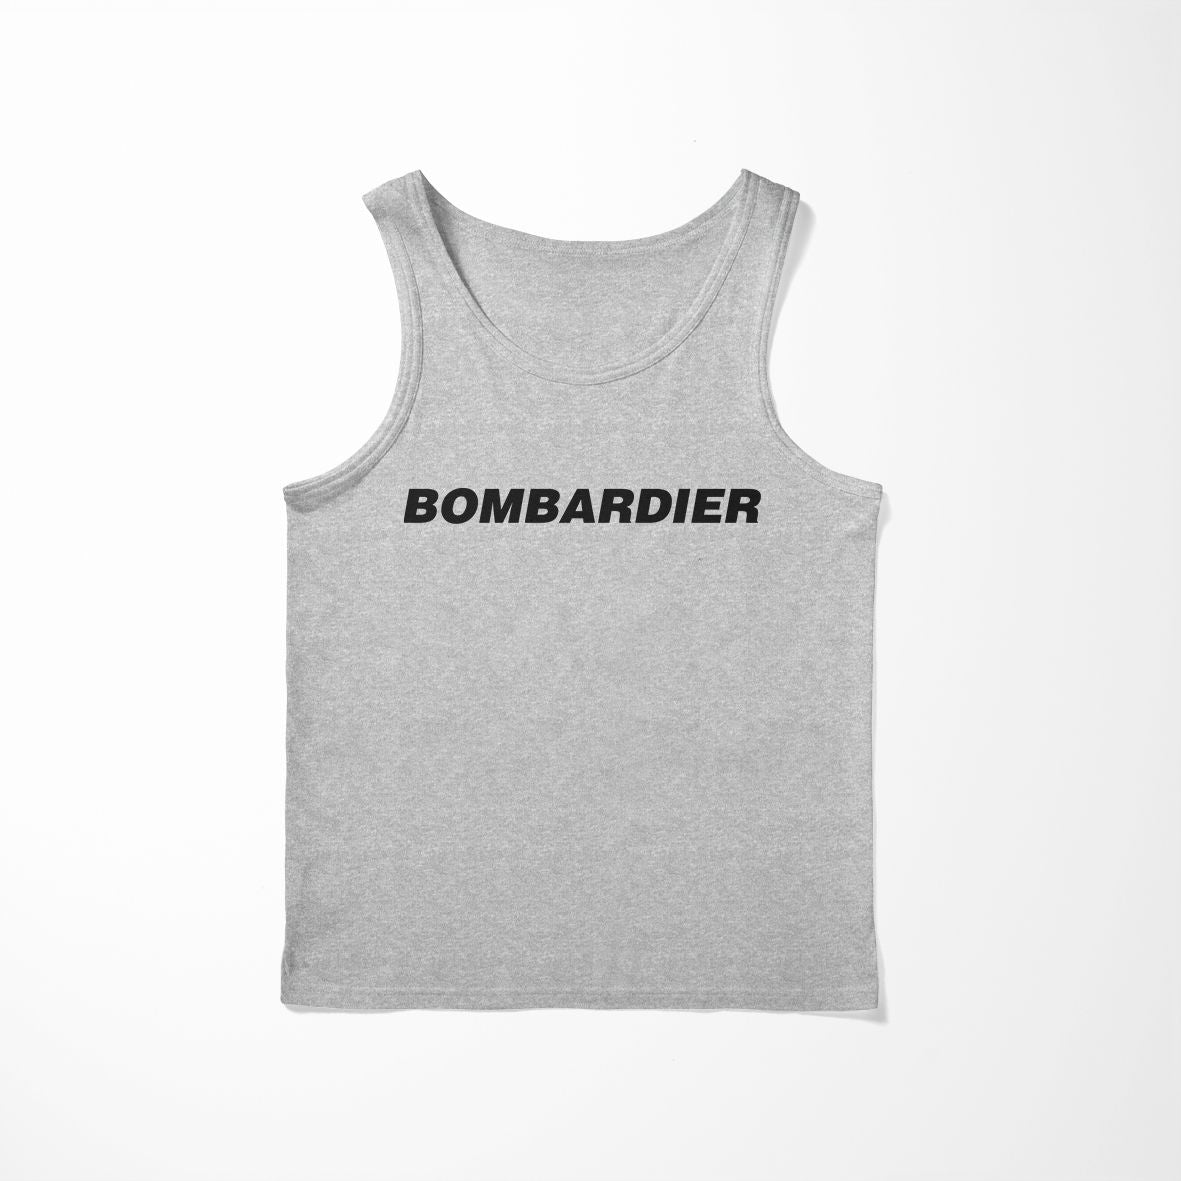 Bombardier & Text Designed Tank Top